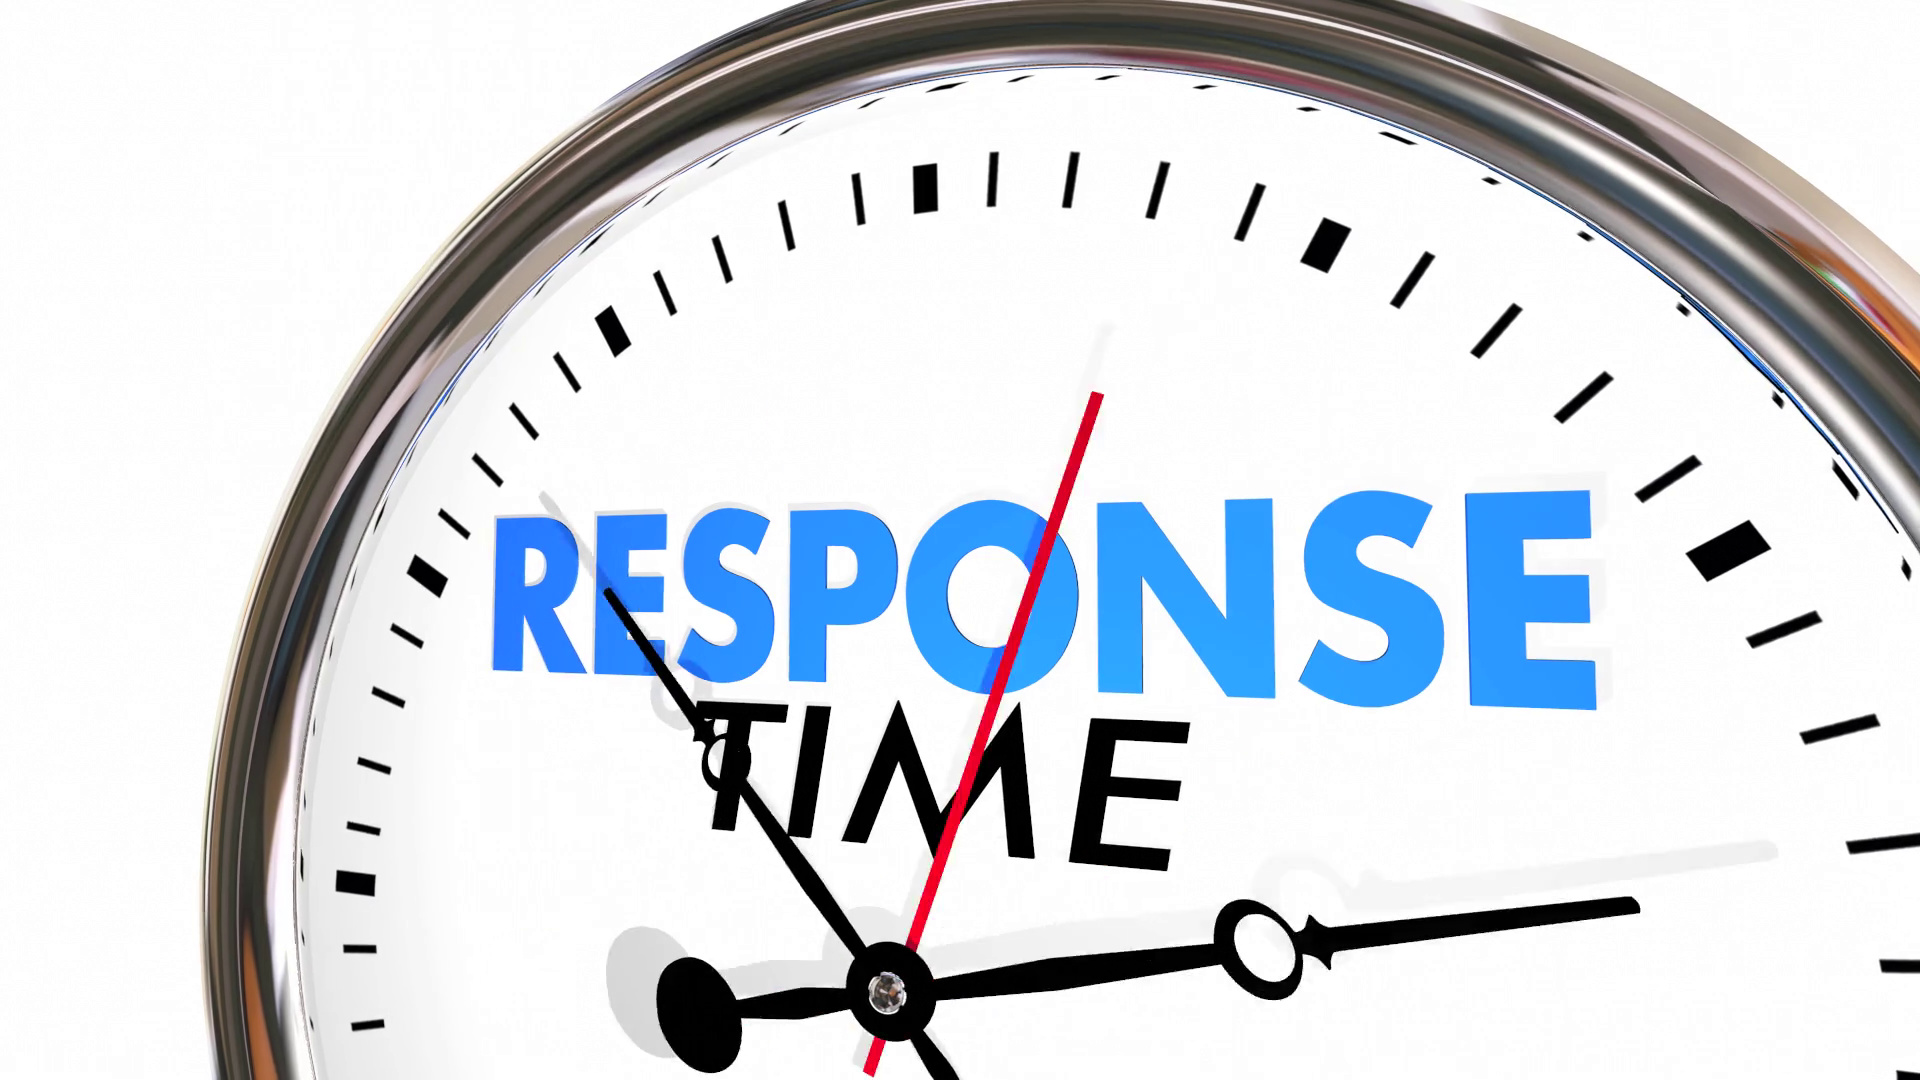 During an hour. Response time. Responsia. Response time Rtings. Quick response time.